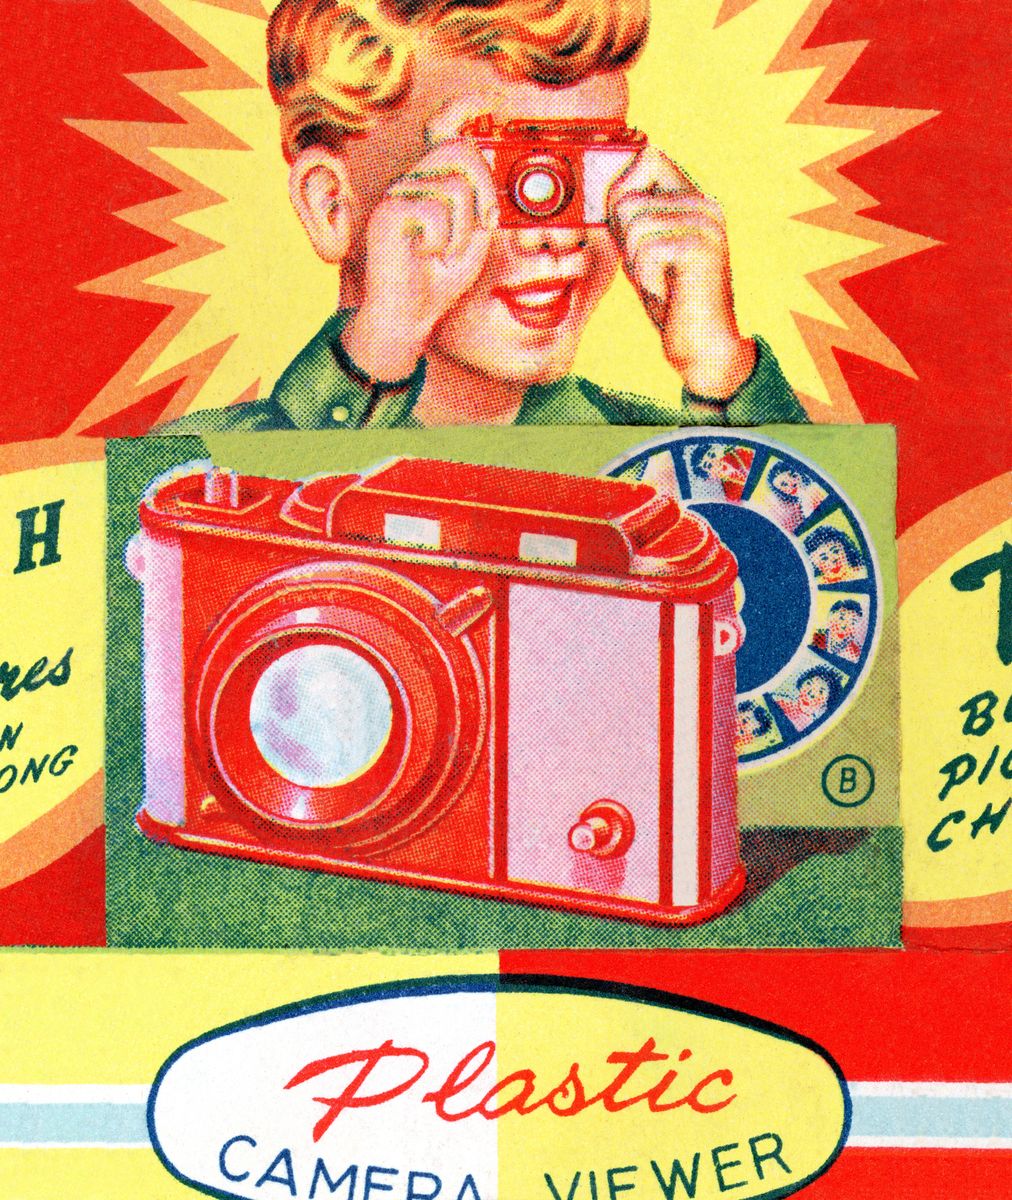 <p>Thanks to our nostalgia for the good old days, there will always be a market for Americana. Vintage signs and advertisements for everything from Coca-Cola to Chevrolet go for thousands on <a href="https://www.ebay.com/sch/i.html?_from=R40&_nkw=vintage+signs&_sacat=0&_sop=16">eBay,</a> but keep in mind the bigger the sign, the better the money.</p>